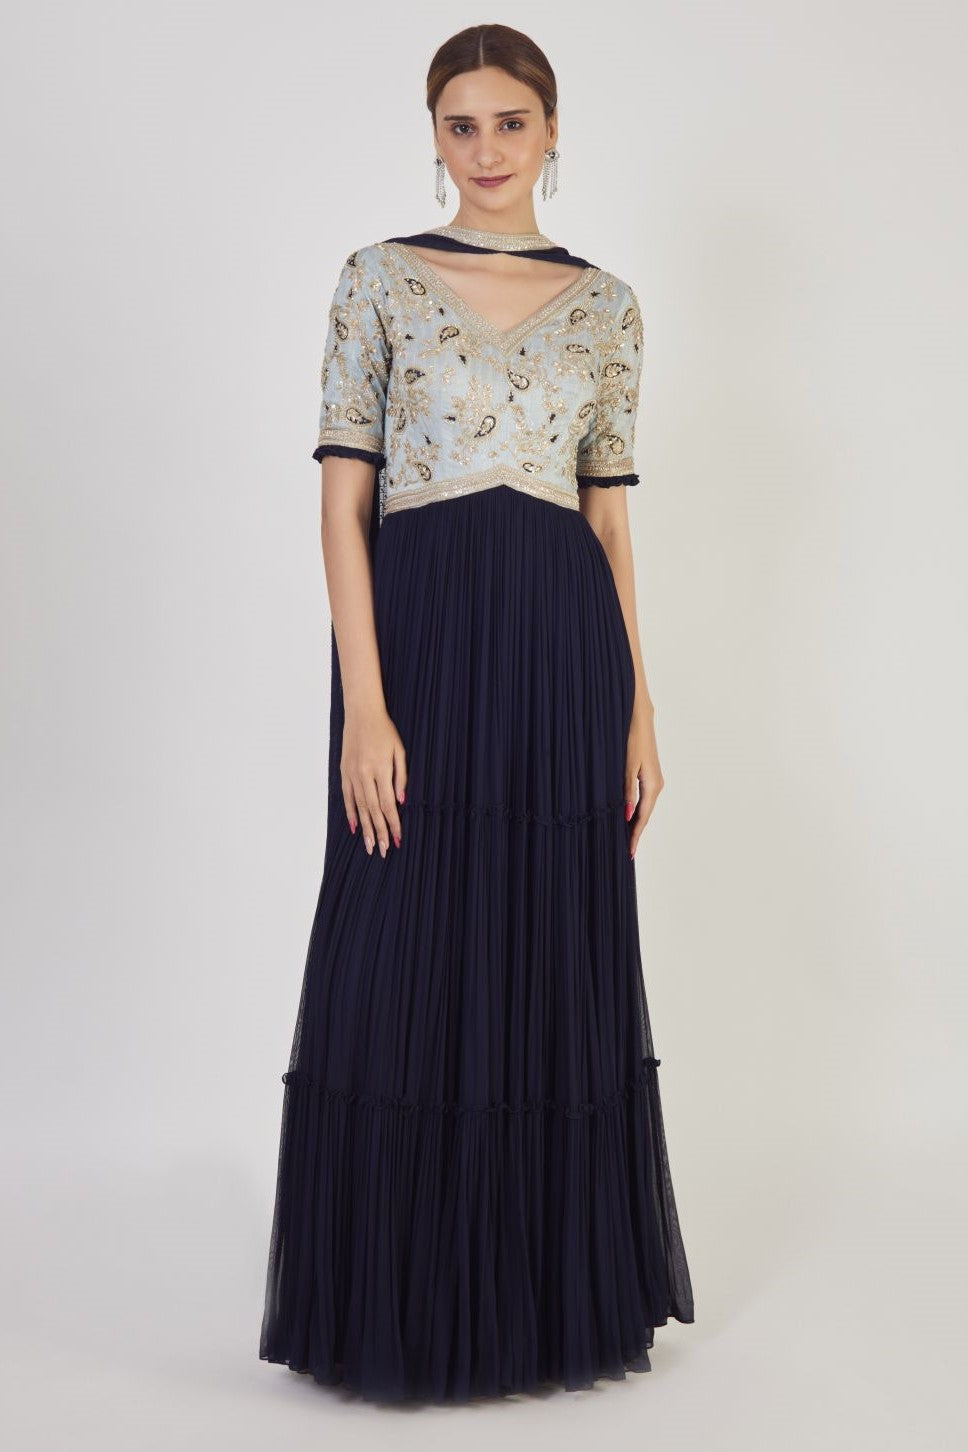 Shop navy blue zardozi work Anarkali suit online in USA with dupatta. Dazzle on weddings and special occasions with exquisite Indian designer dresses, sharara suits, Anarkali suits, wedding lehengas from Pure Elegance Indian fashion store in USA.-full view